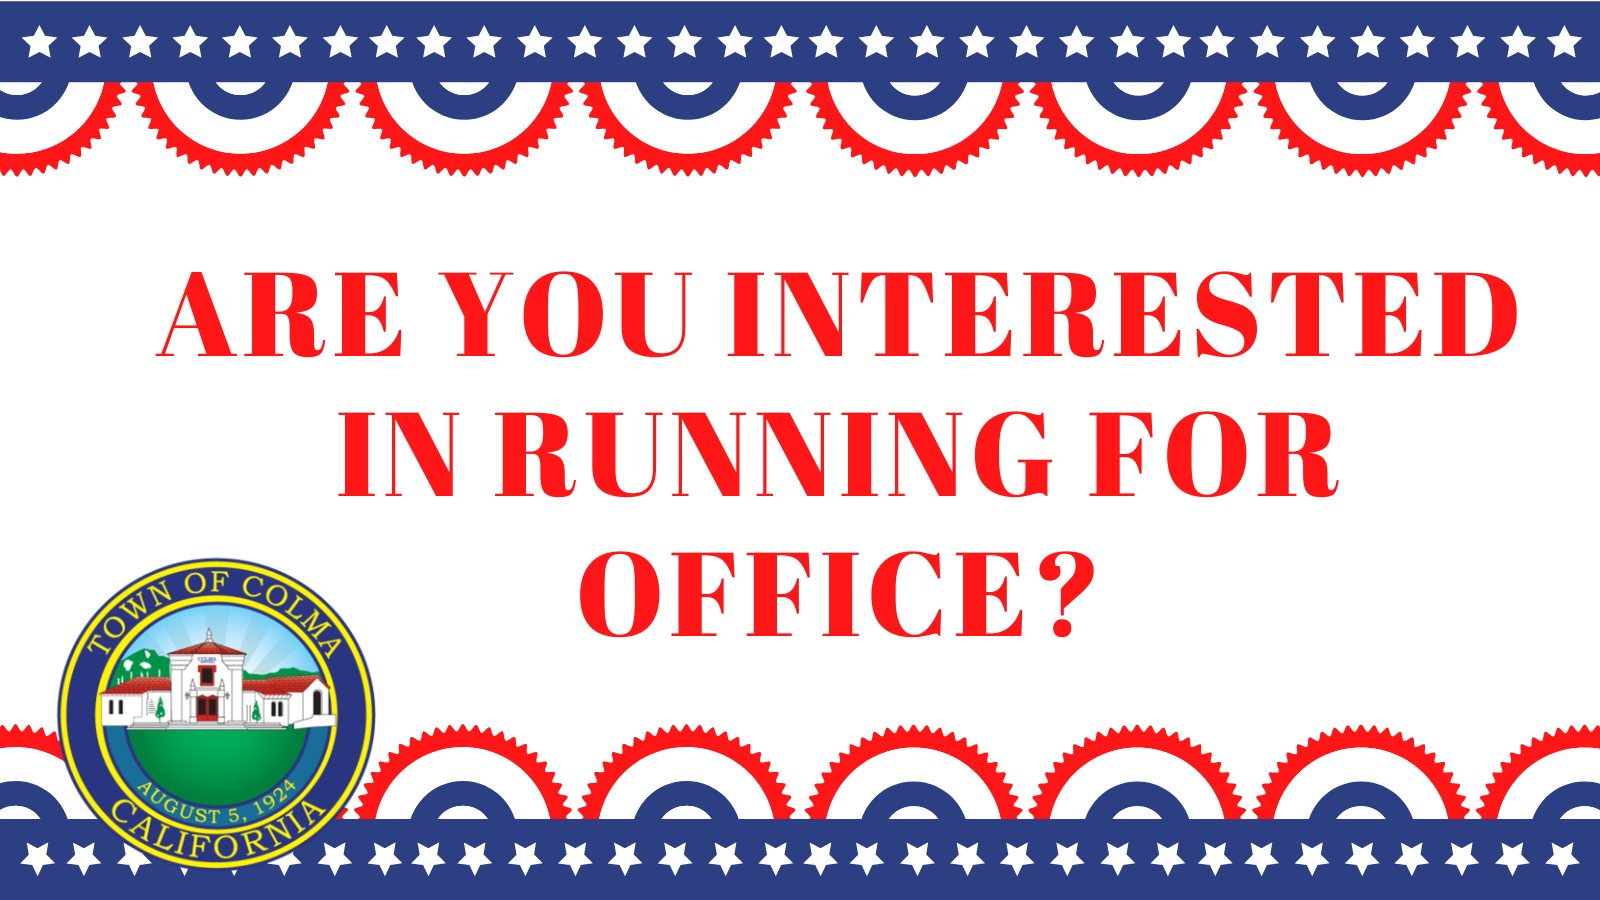 Are you interested in running for office?